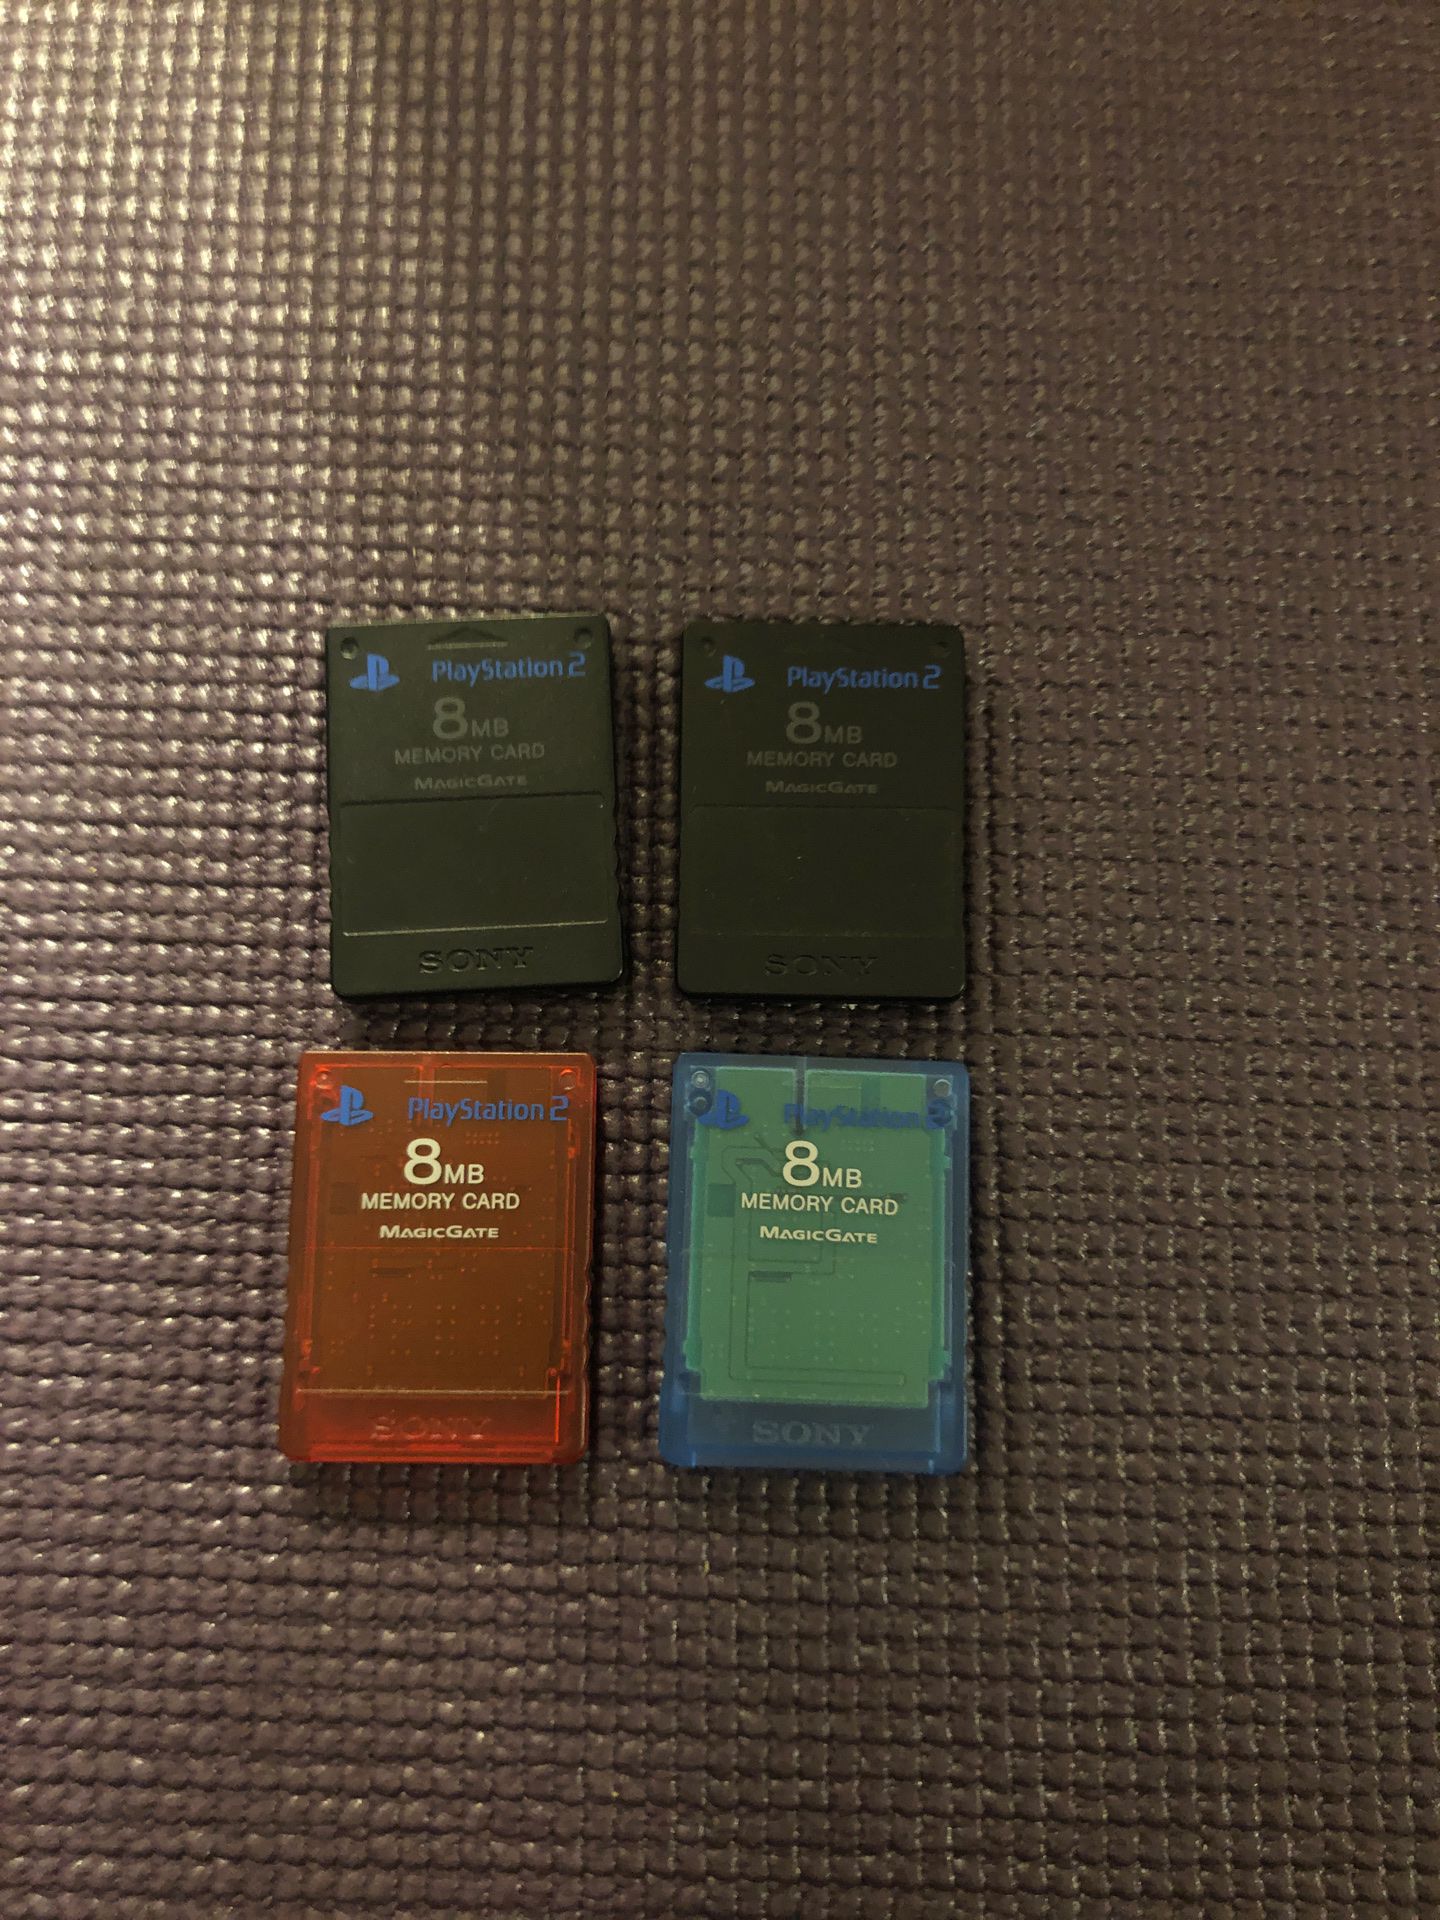 8MB PS2 memory cards